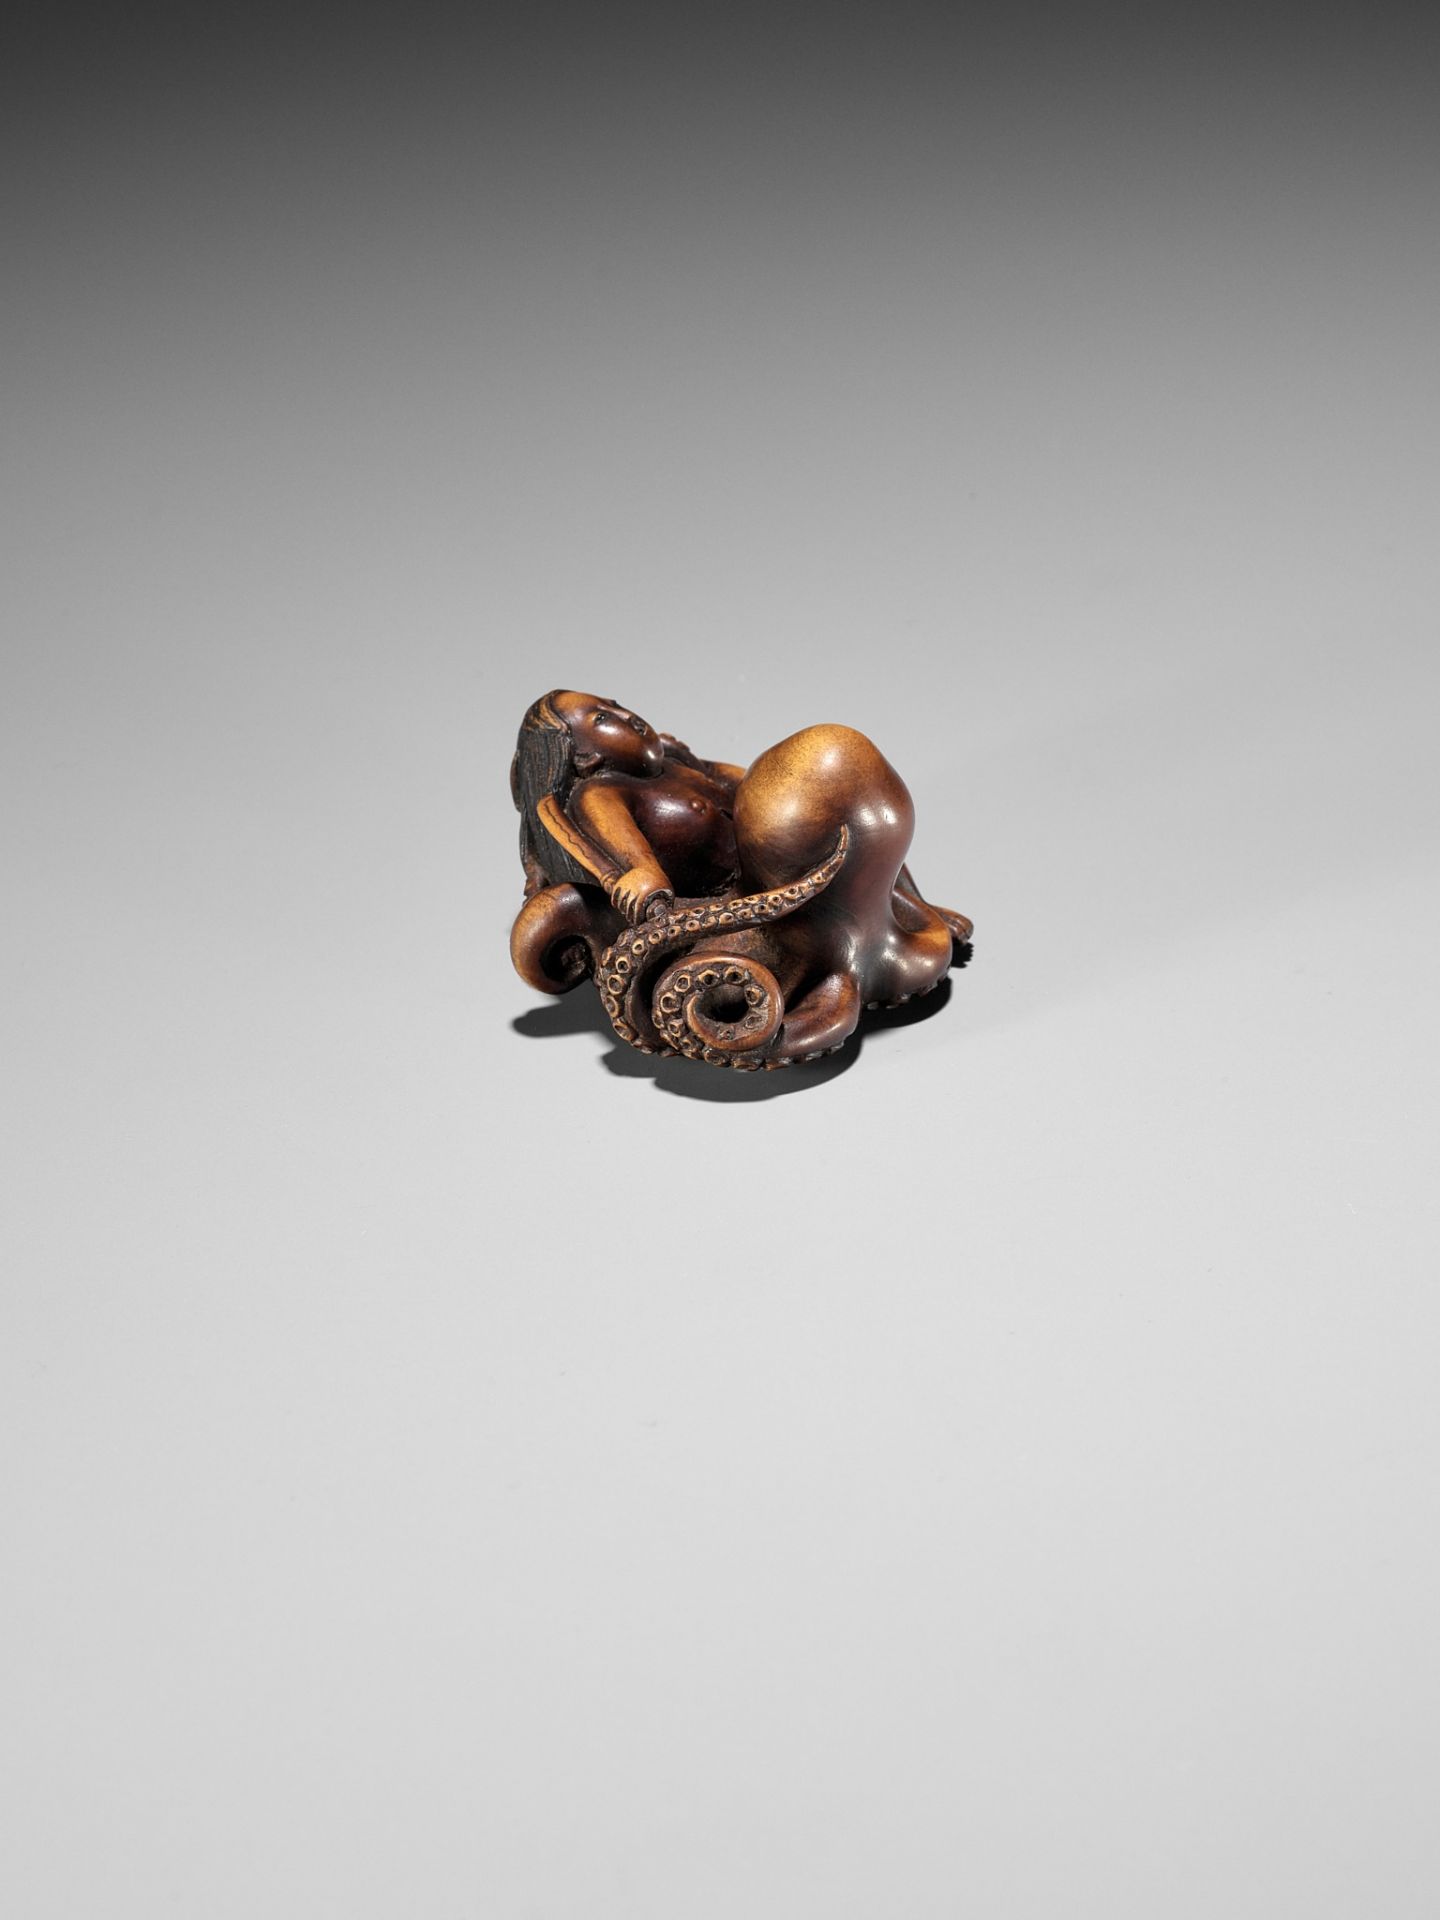 A SUPERB WOOD NETSUKE OF AN AMA STRUGGLING WITH AN OCTOPUS, ATTRIBUTED TO IKKYU - Image 15 of 16